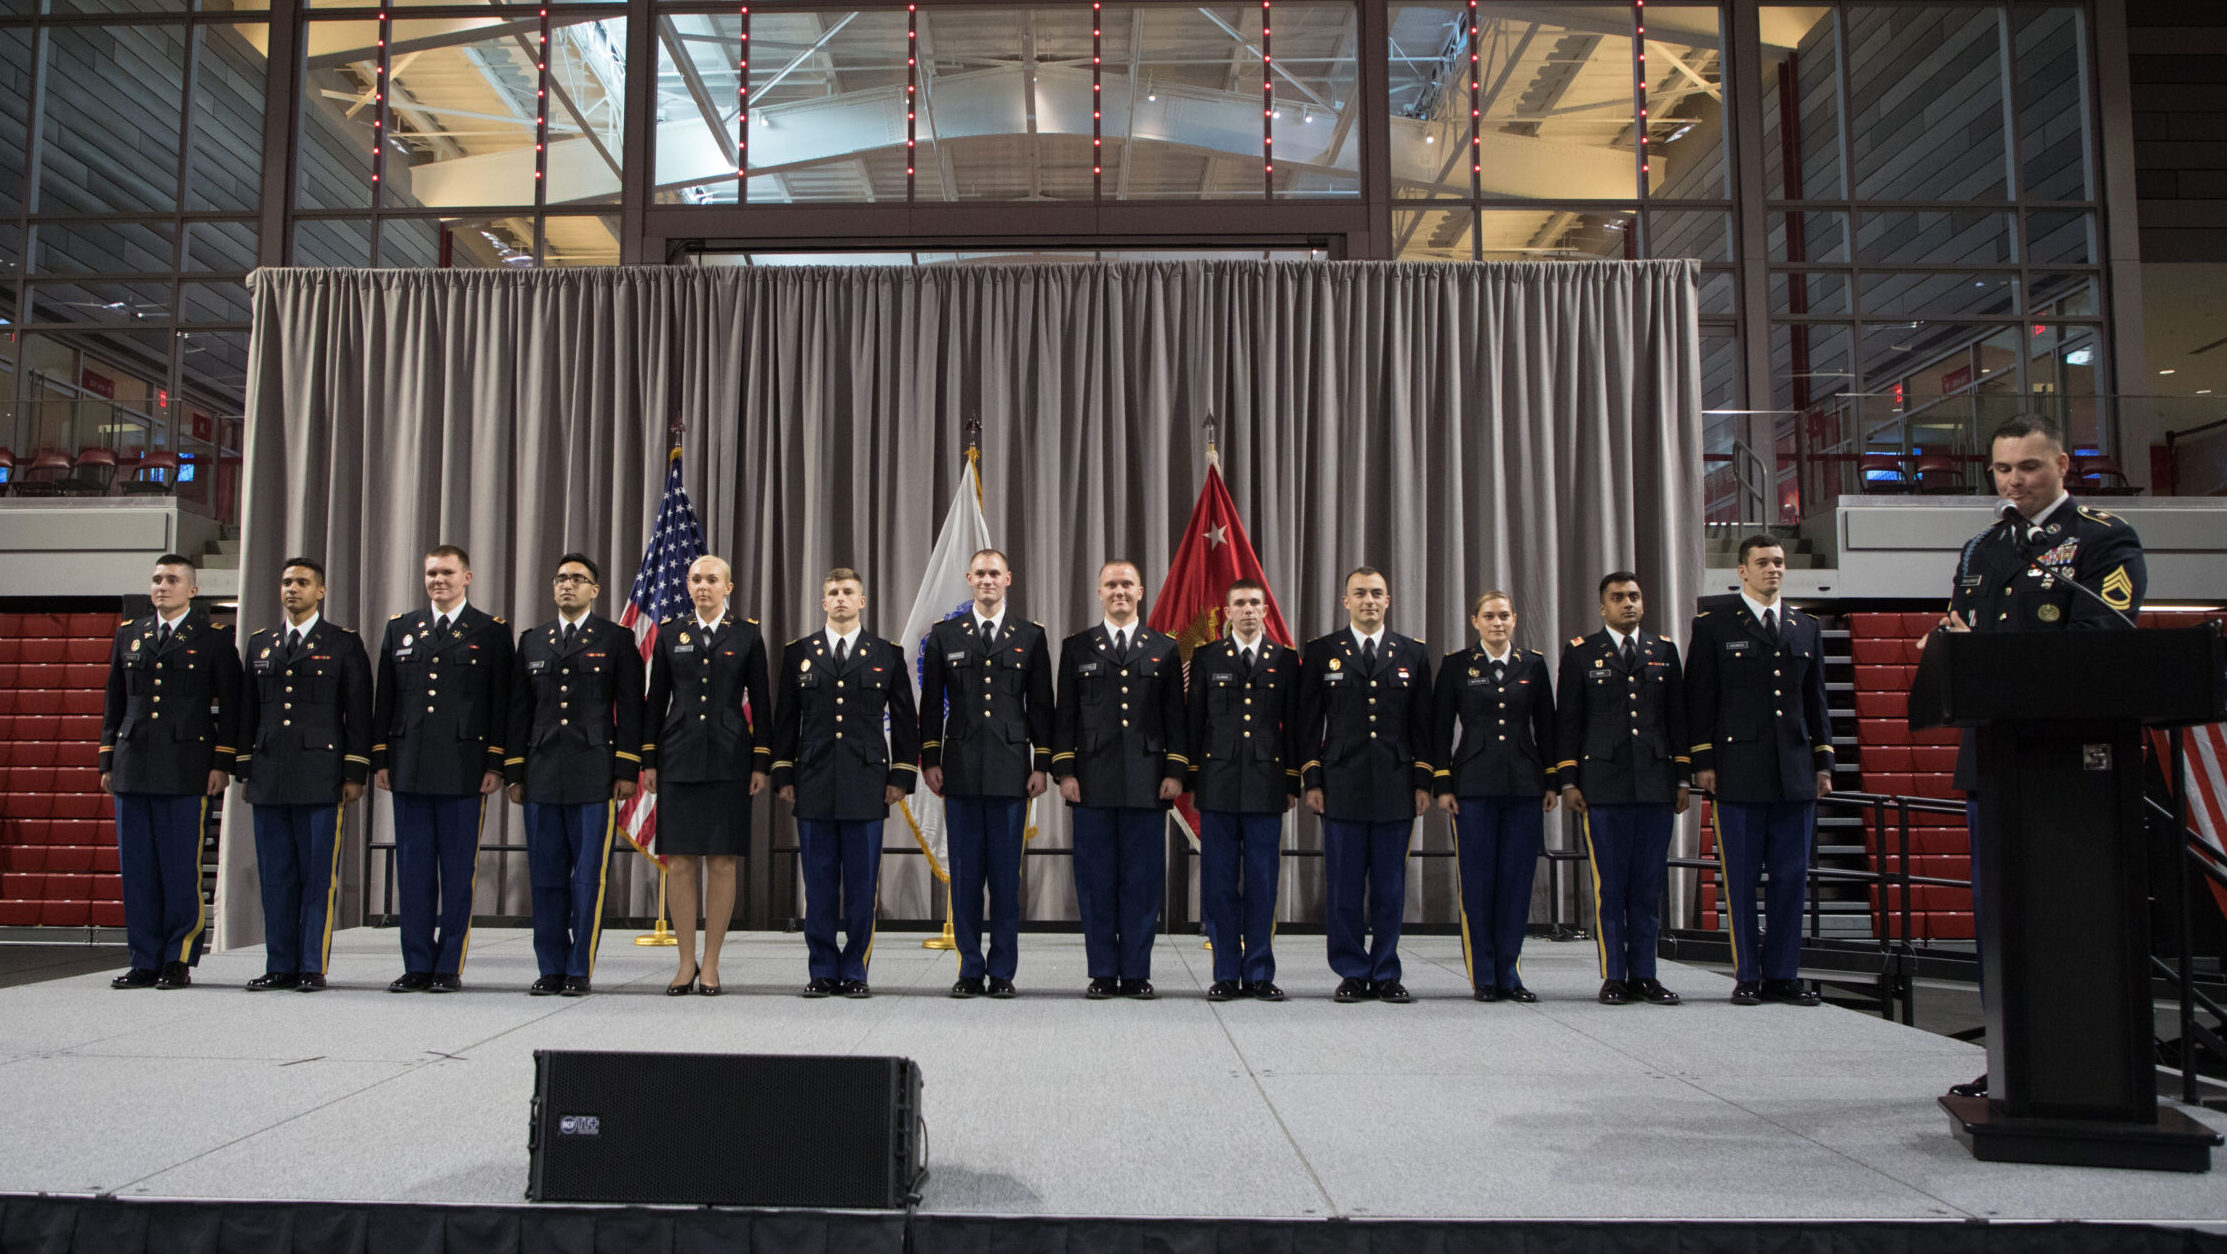 Students stand on stage during the commissioning ceremony